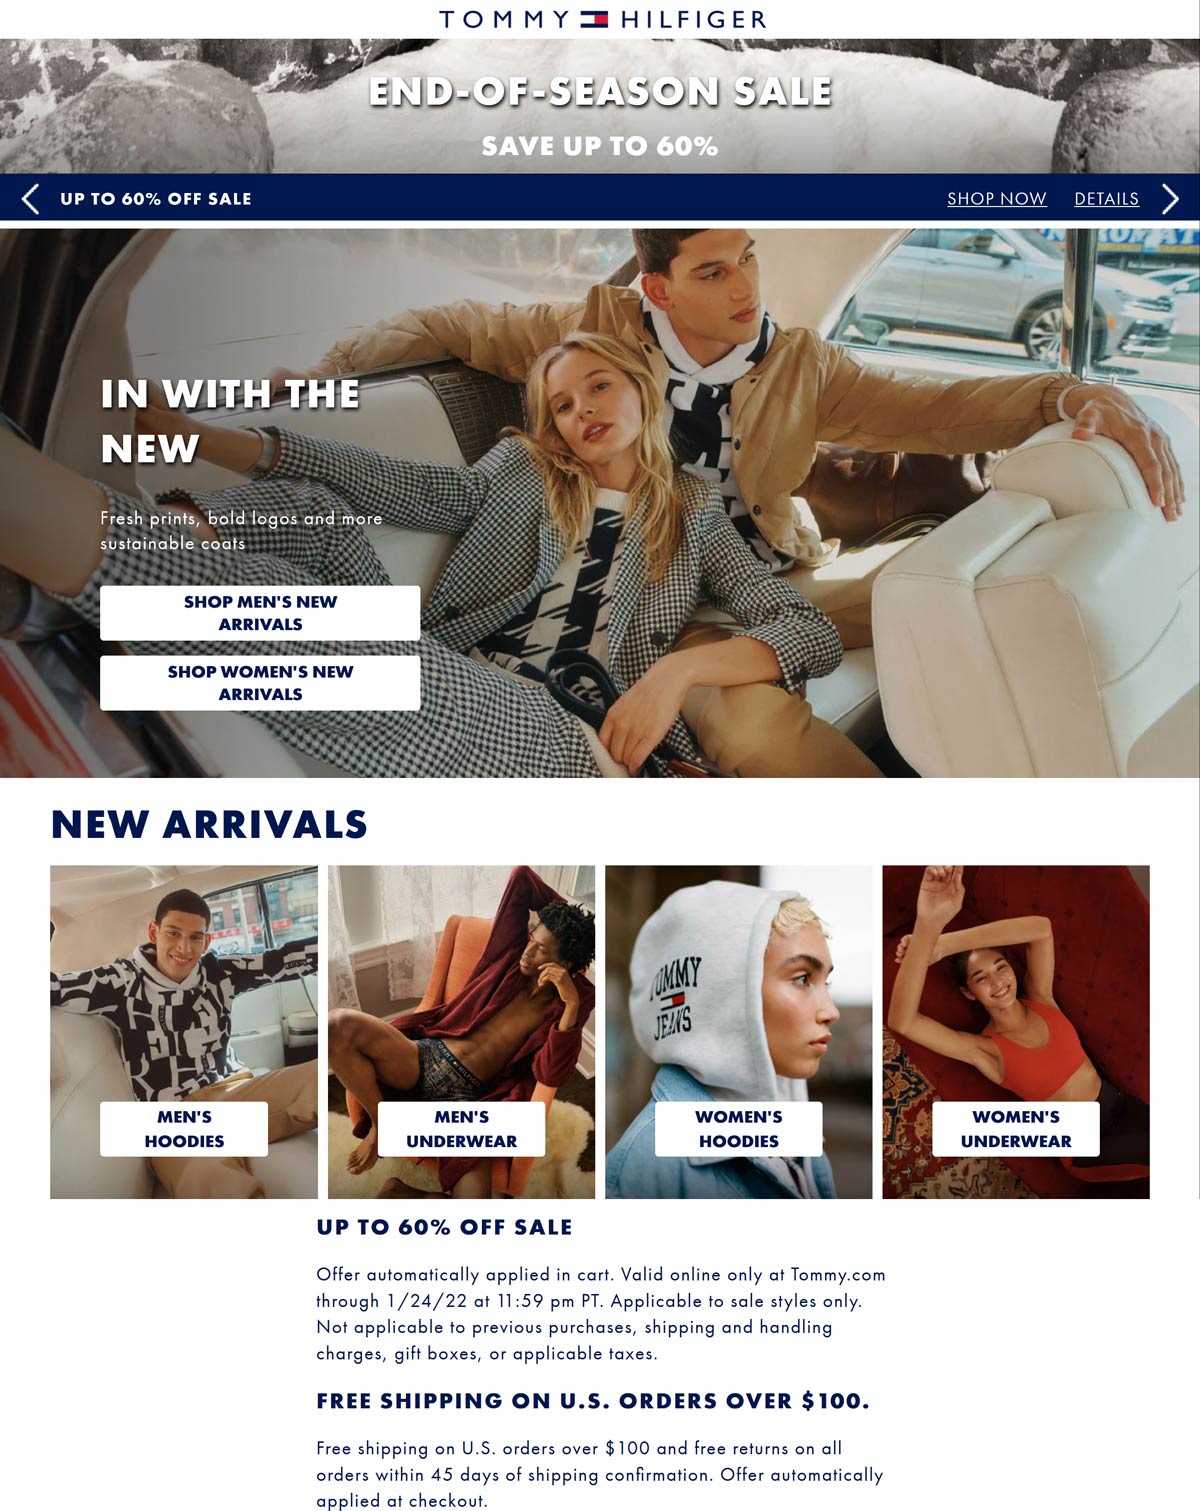 Tommy Hilfiger stores Coupon  60% off various sale categories at Tommy Hilfiger #tommyhilfiger 